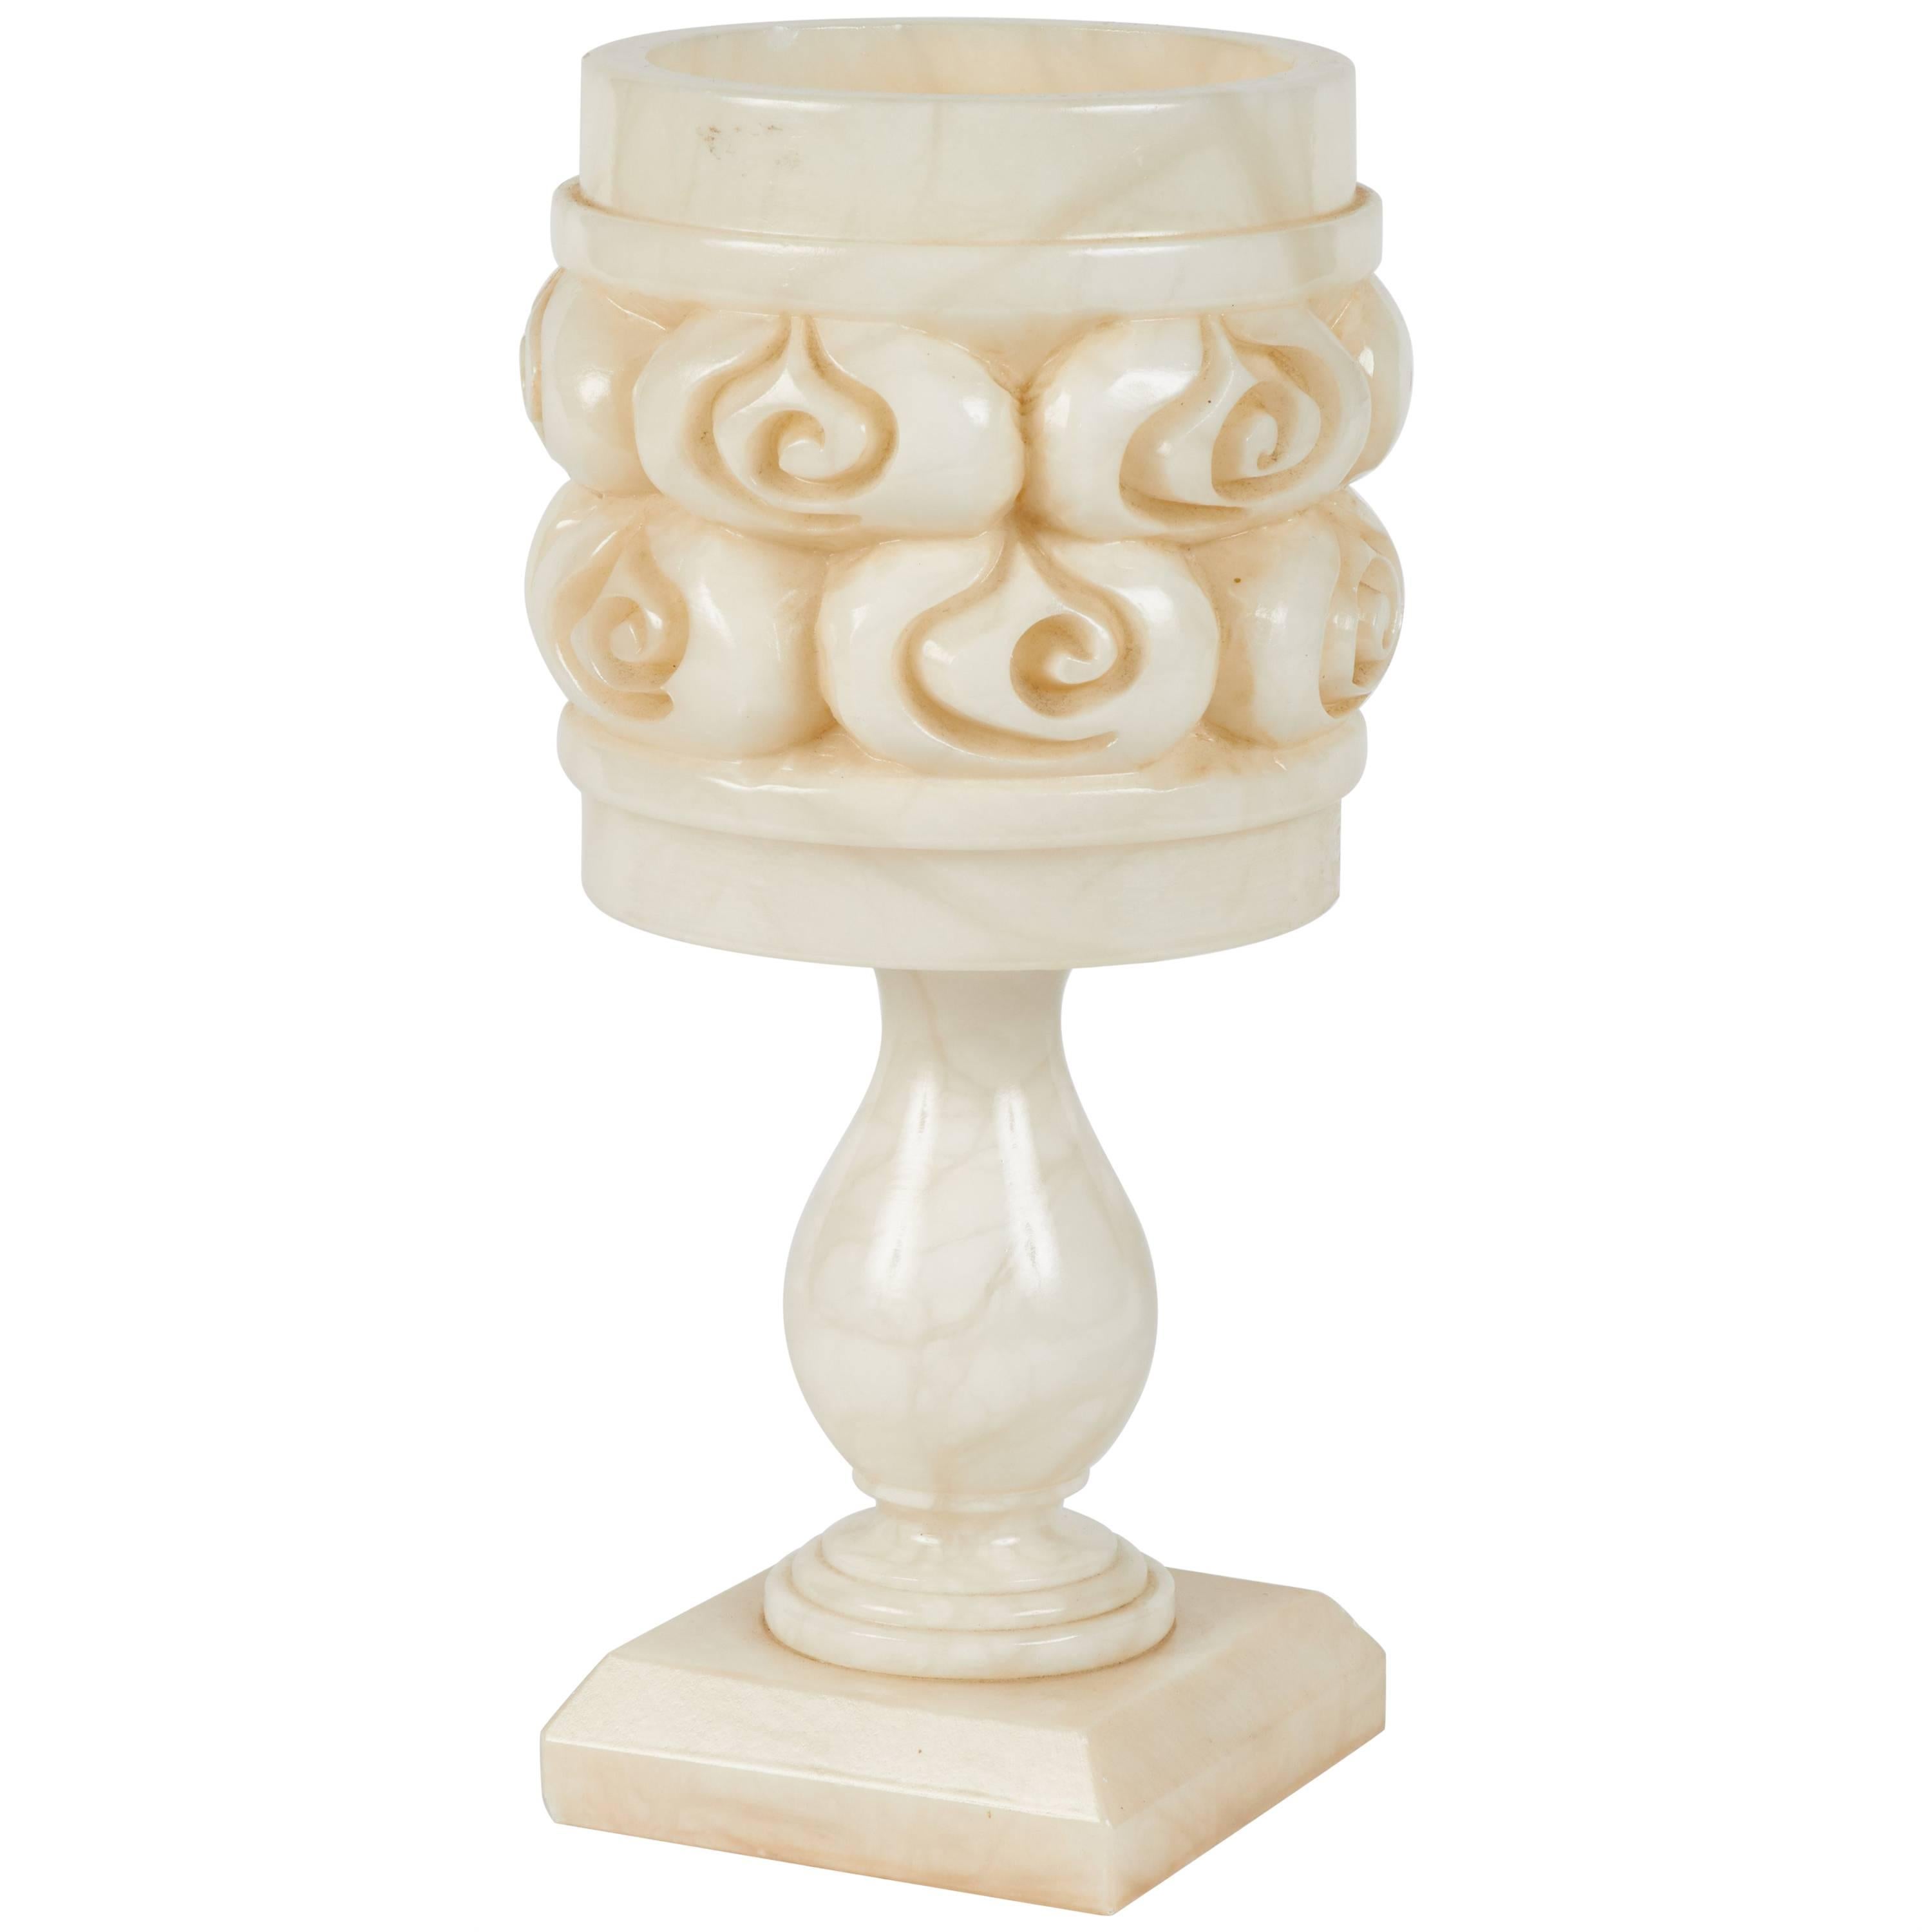 1940s Alabaster Lamp with Rose Carvings from France